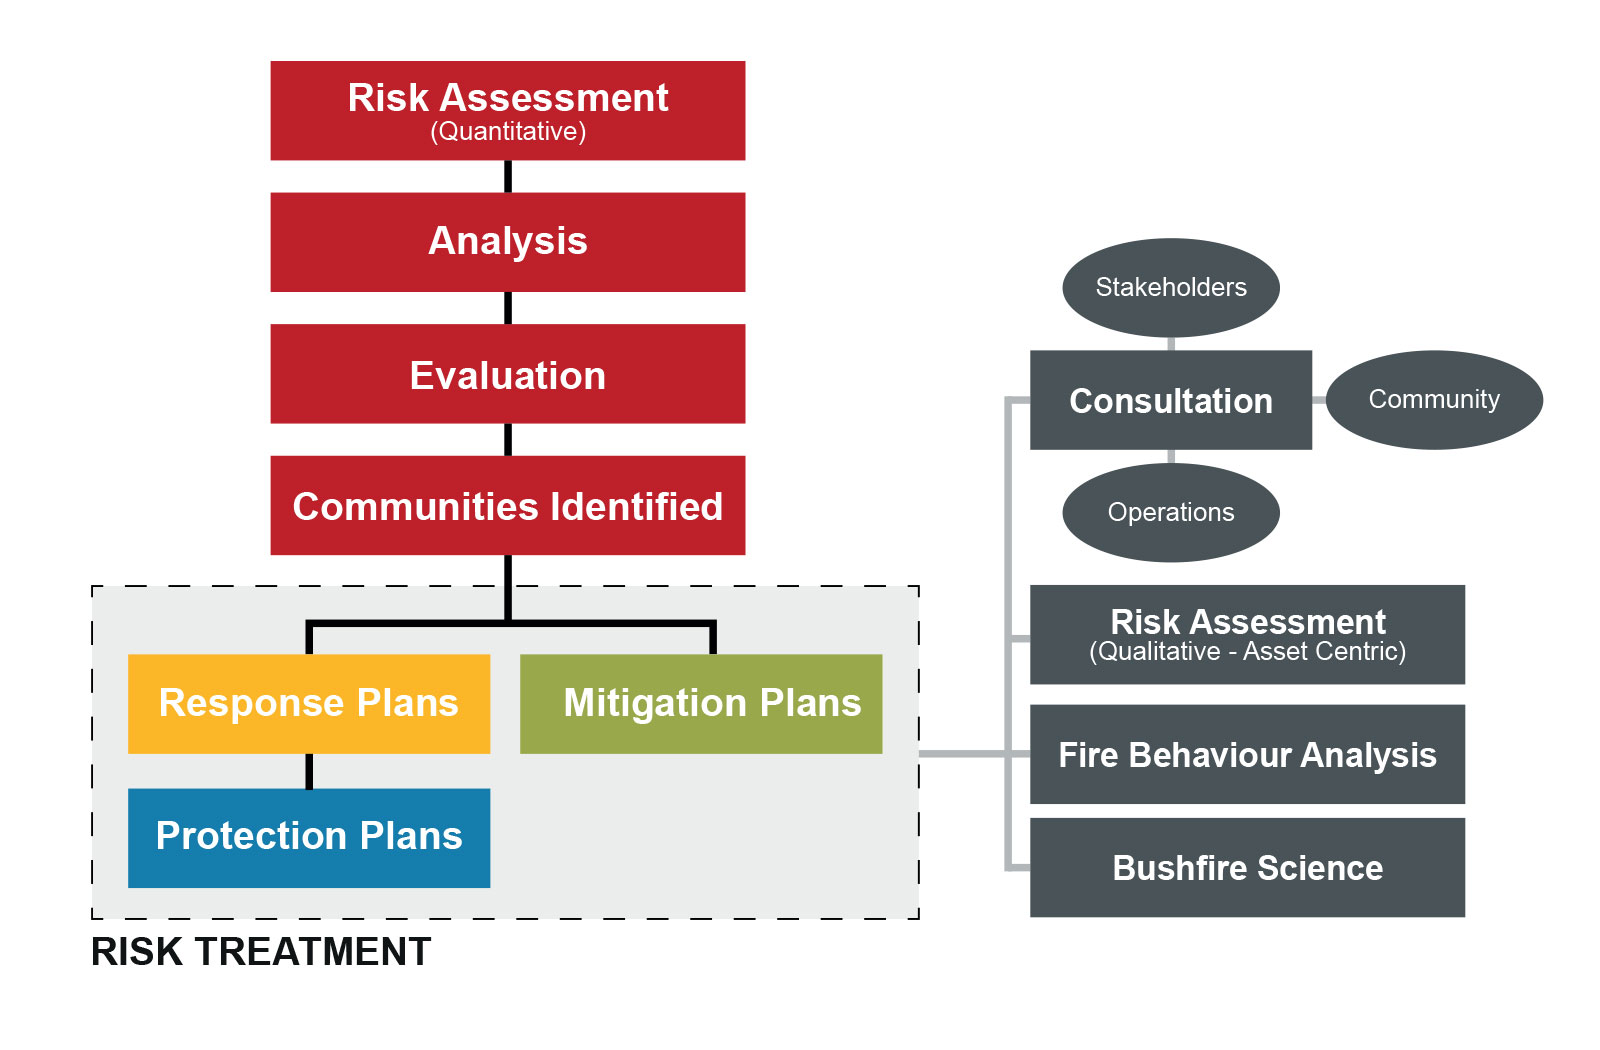 Emergency Response Plan For Fire Flow Chart